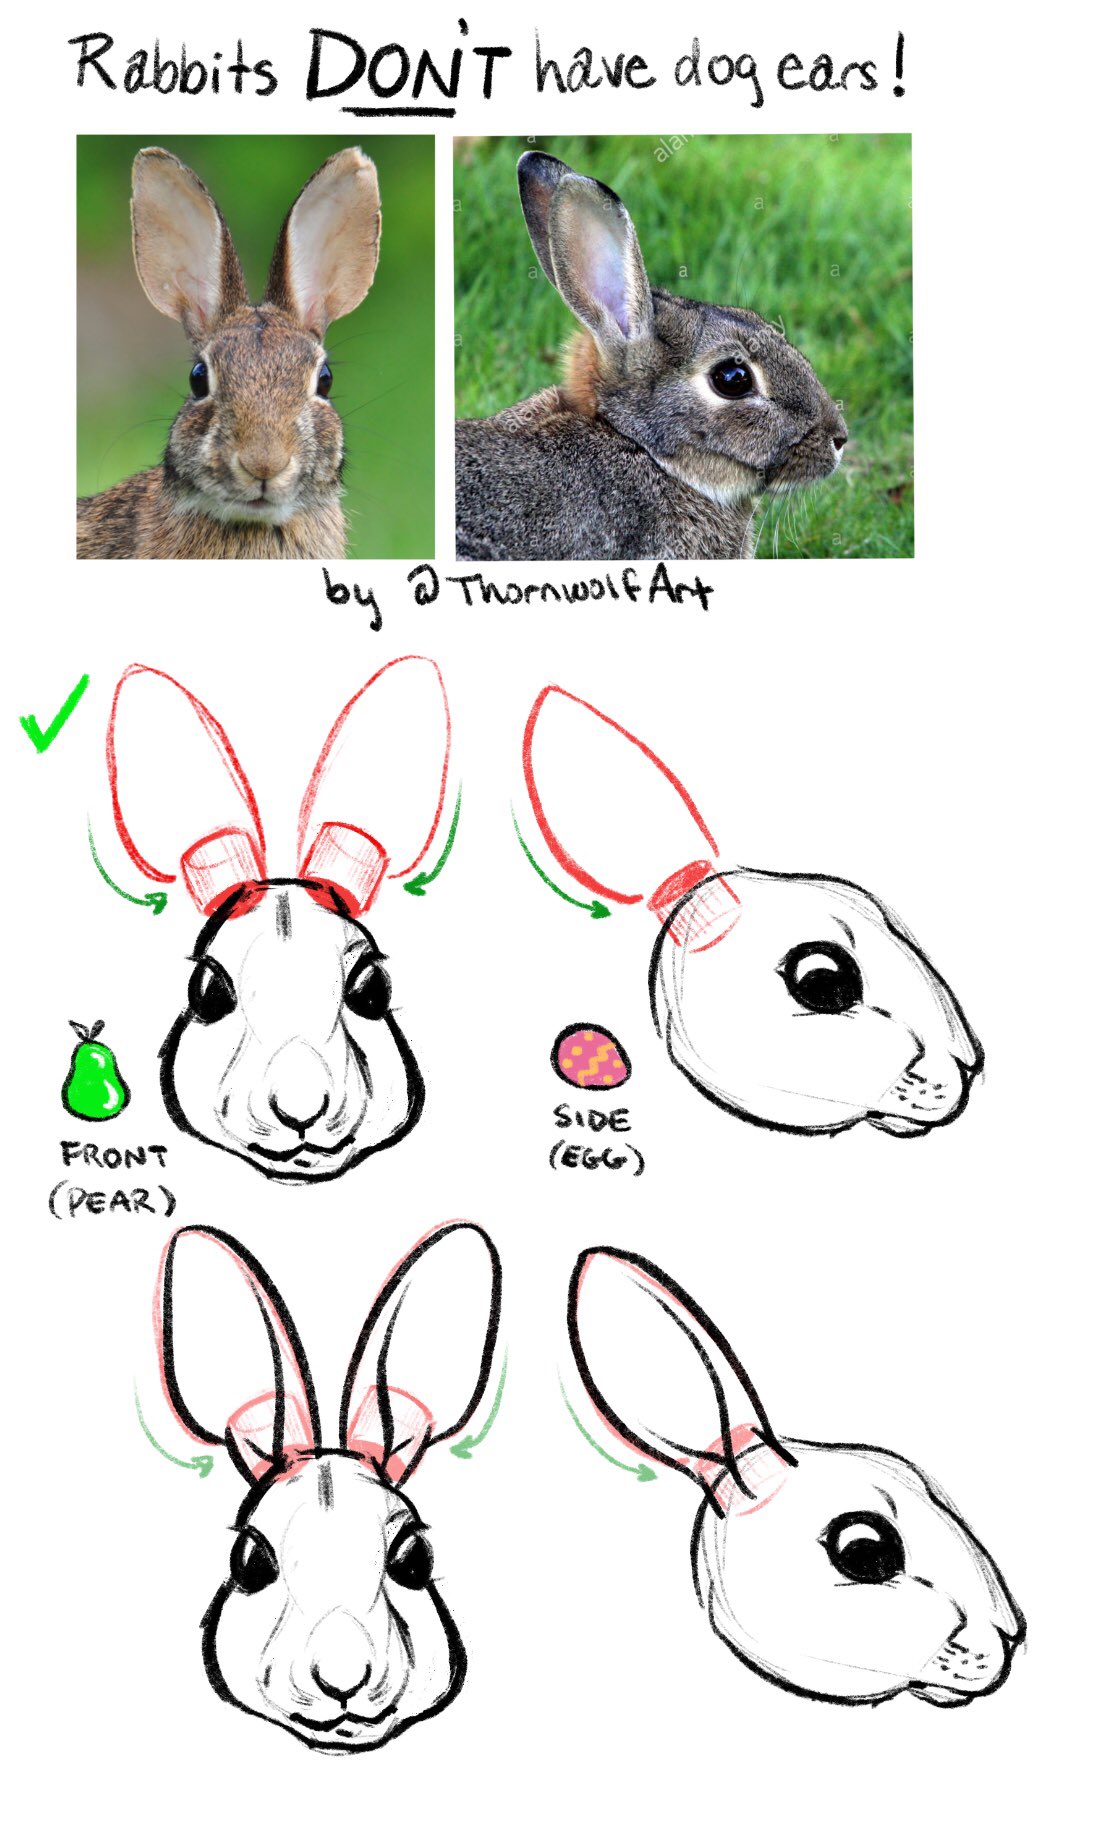 Cute Sketch rabbit drawing ears up for Windows PC